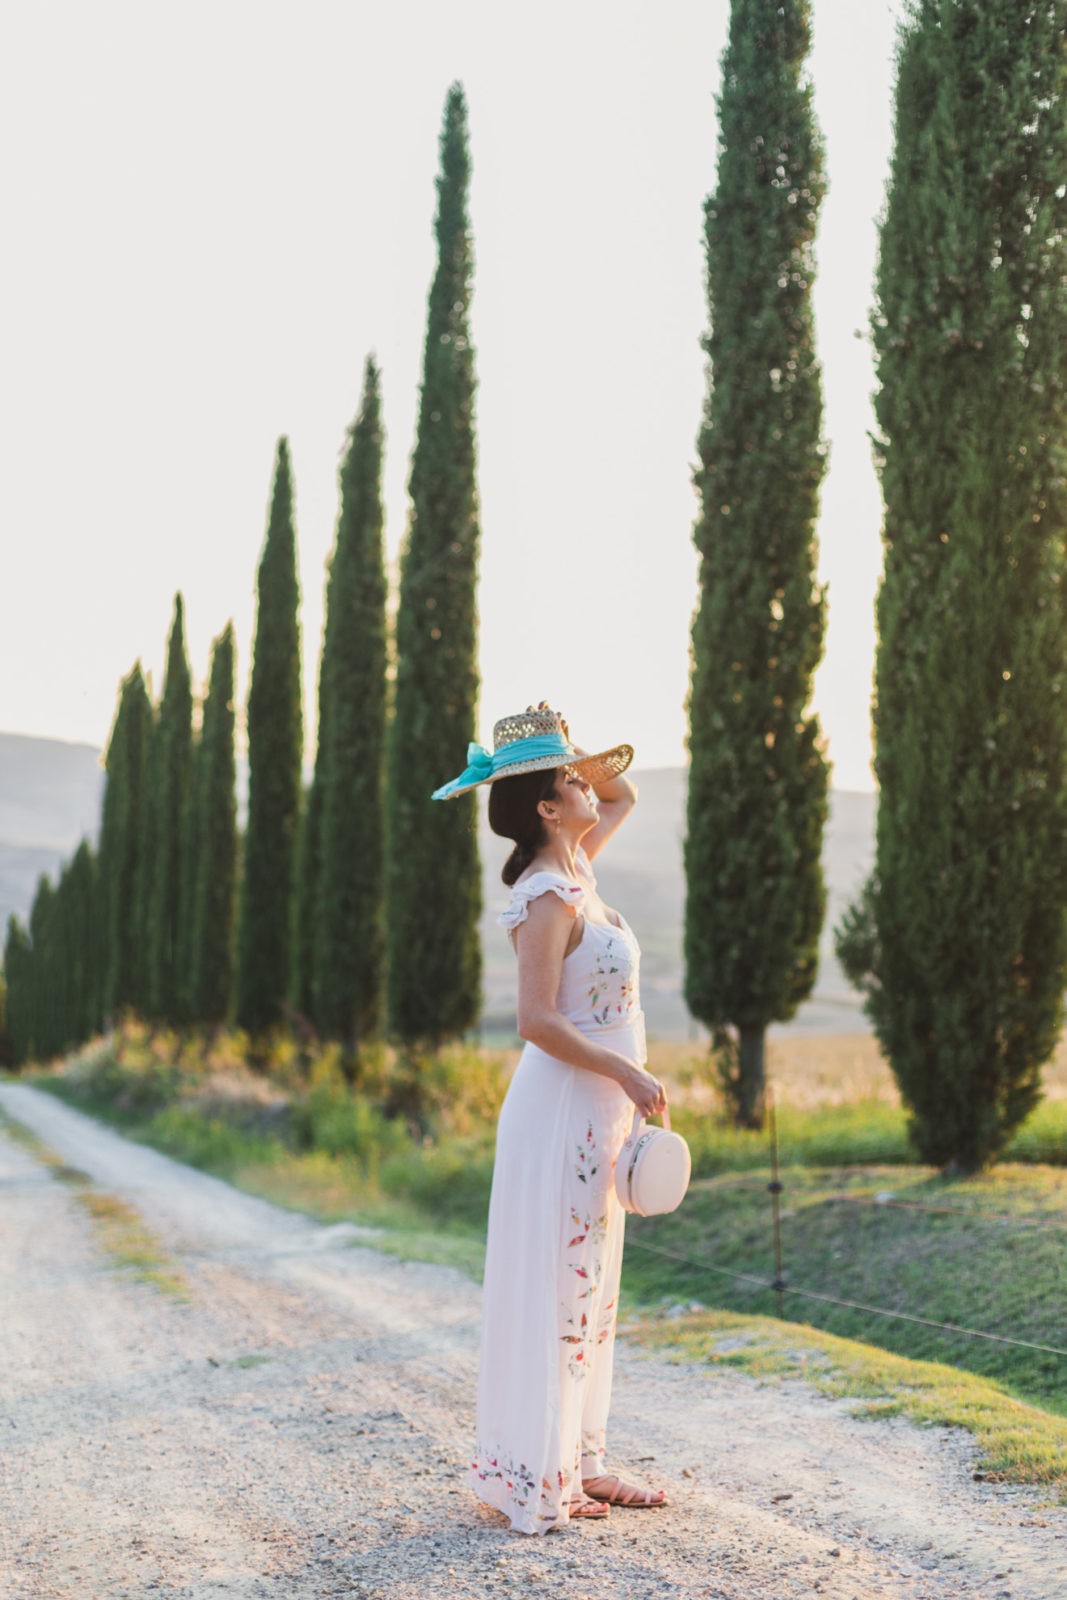 The Tuscan Countryside + Italy Recap by Travel Blogger Laura Lily,